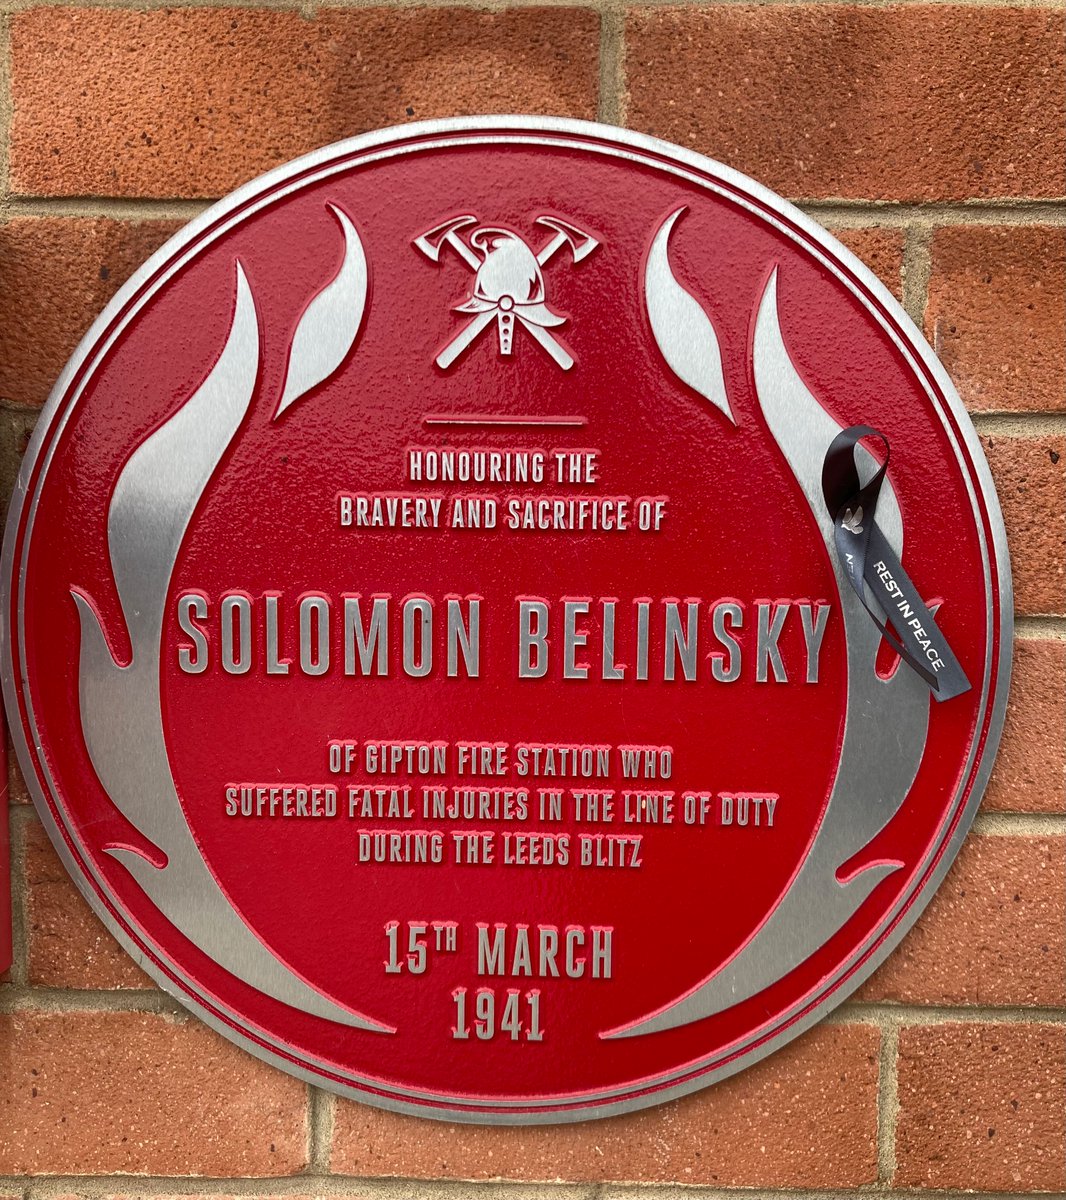 Remembering AFS firefighter Solomon Belinsky who was fatally injured during the Leeds Blitz on 15 March 1941. Solly was based at Gipton fire station @OldFireStaLS9. Learn more about his contribution & visit his @fbunational red plaque: redplaque.org.uk/plaque/solomon…